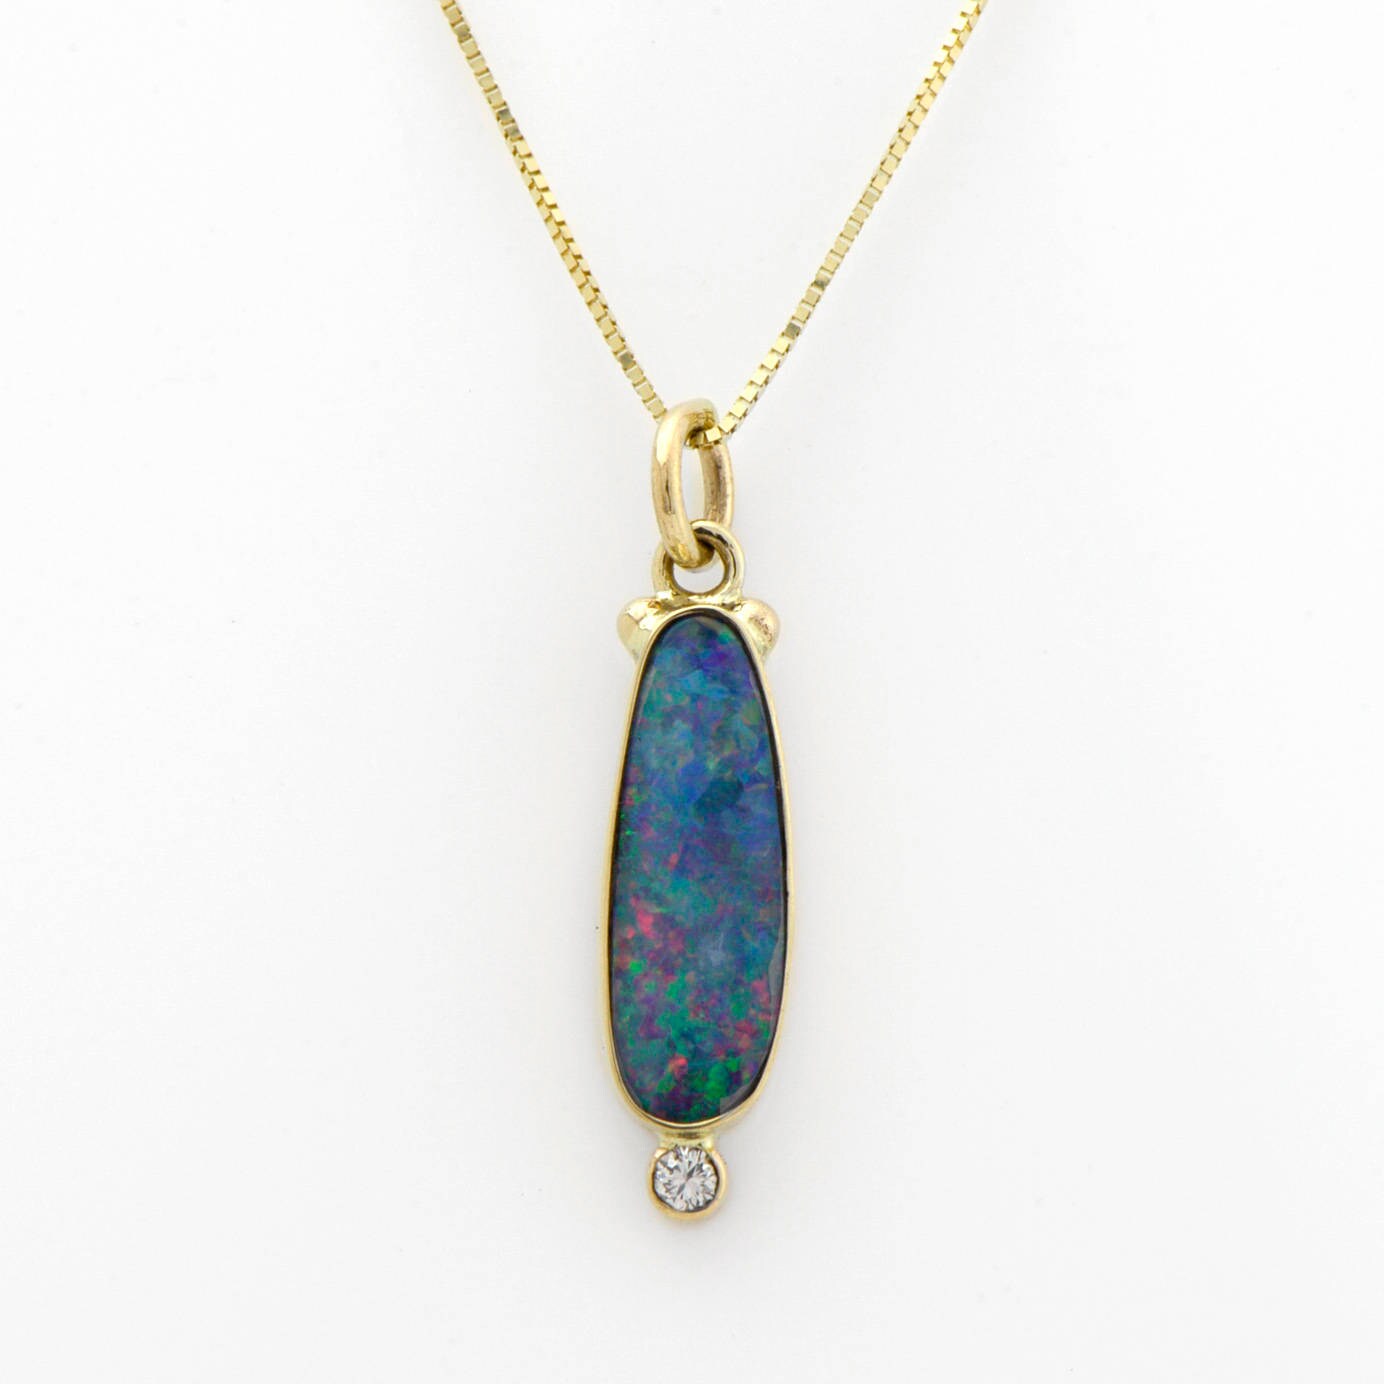 14K Yellow gold pendant with Australian crystal opals - JASMINEJEWELRY